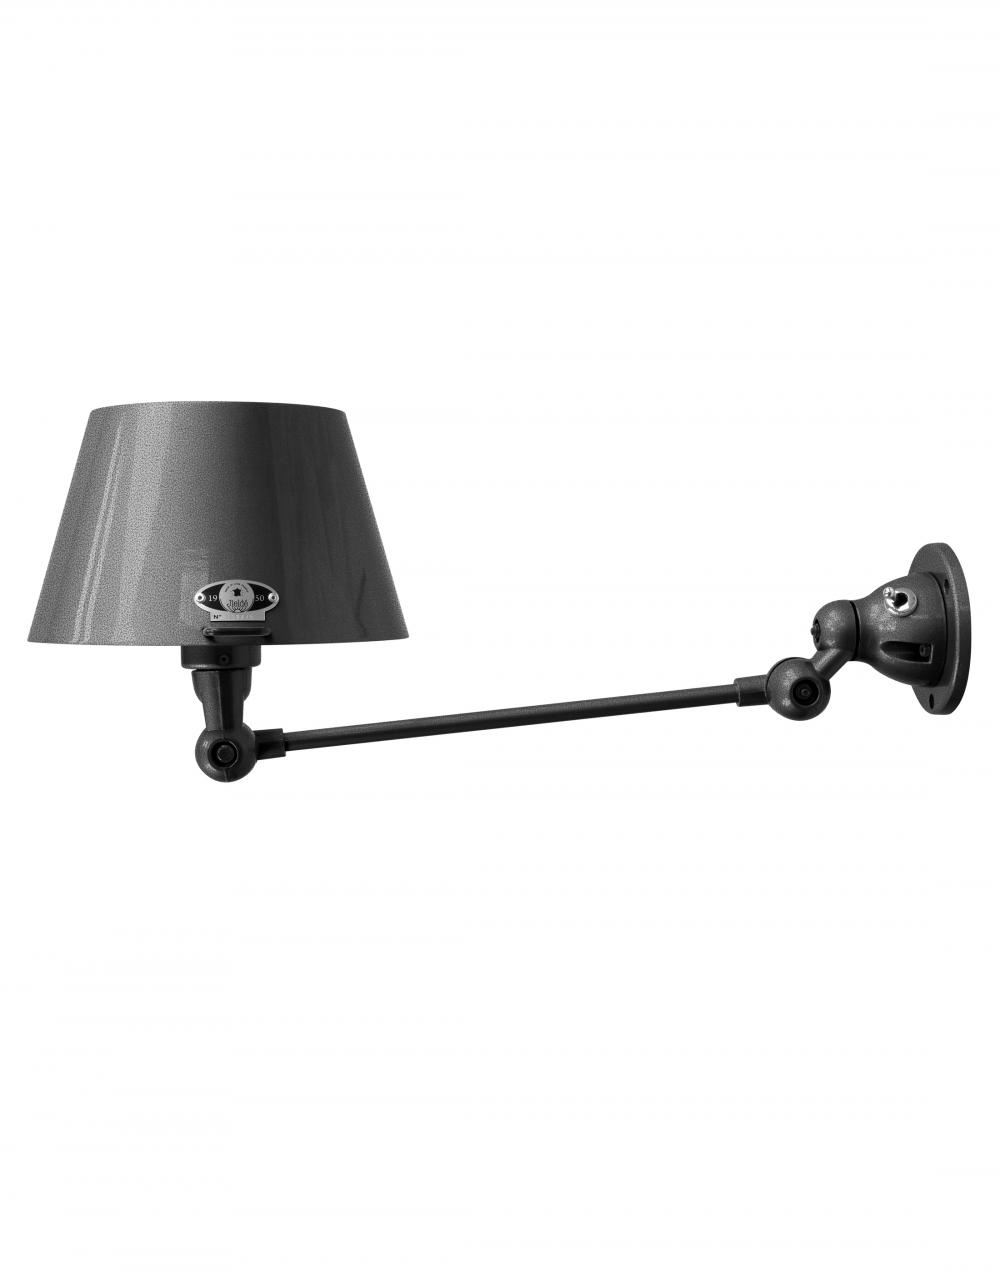 Jielde Aicler One Arm Adjustable Wall Light Straight Shade Black Hammered Gloss Hardwired No Switch